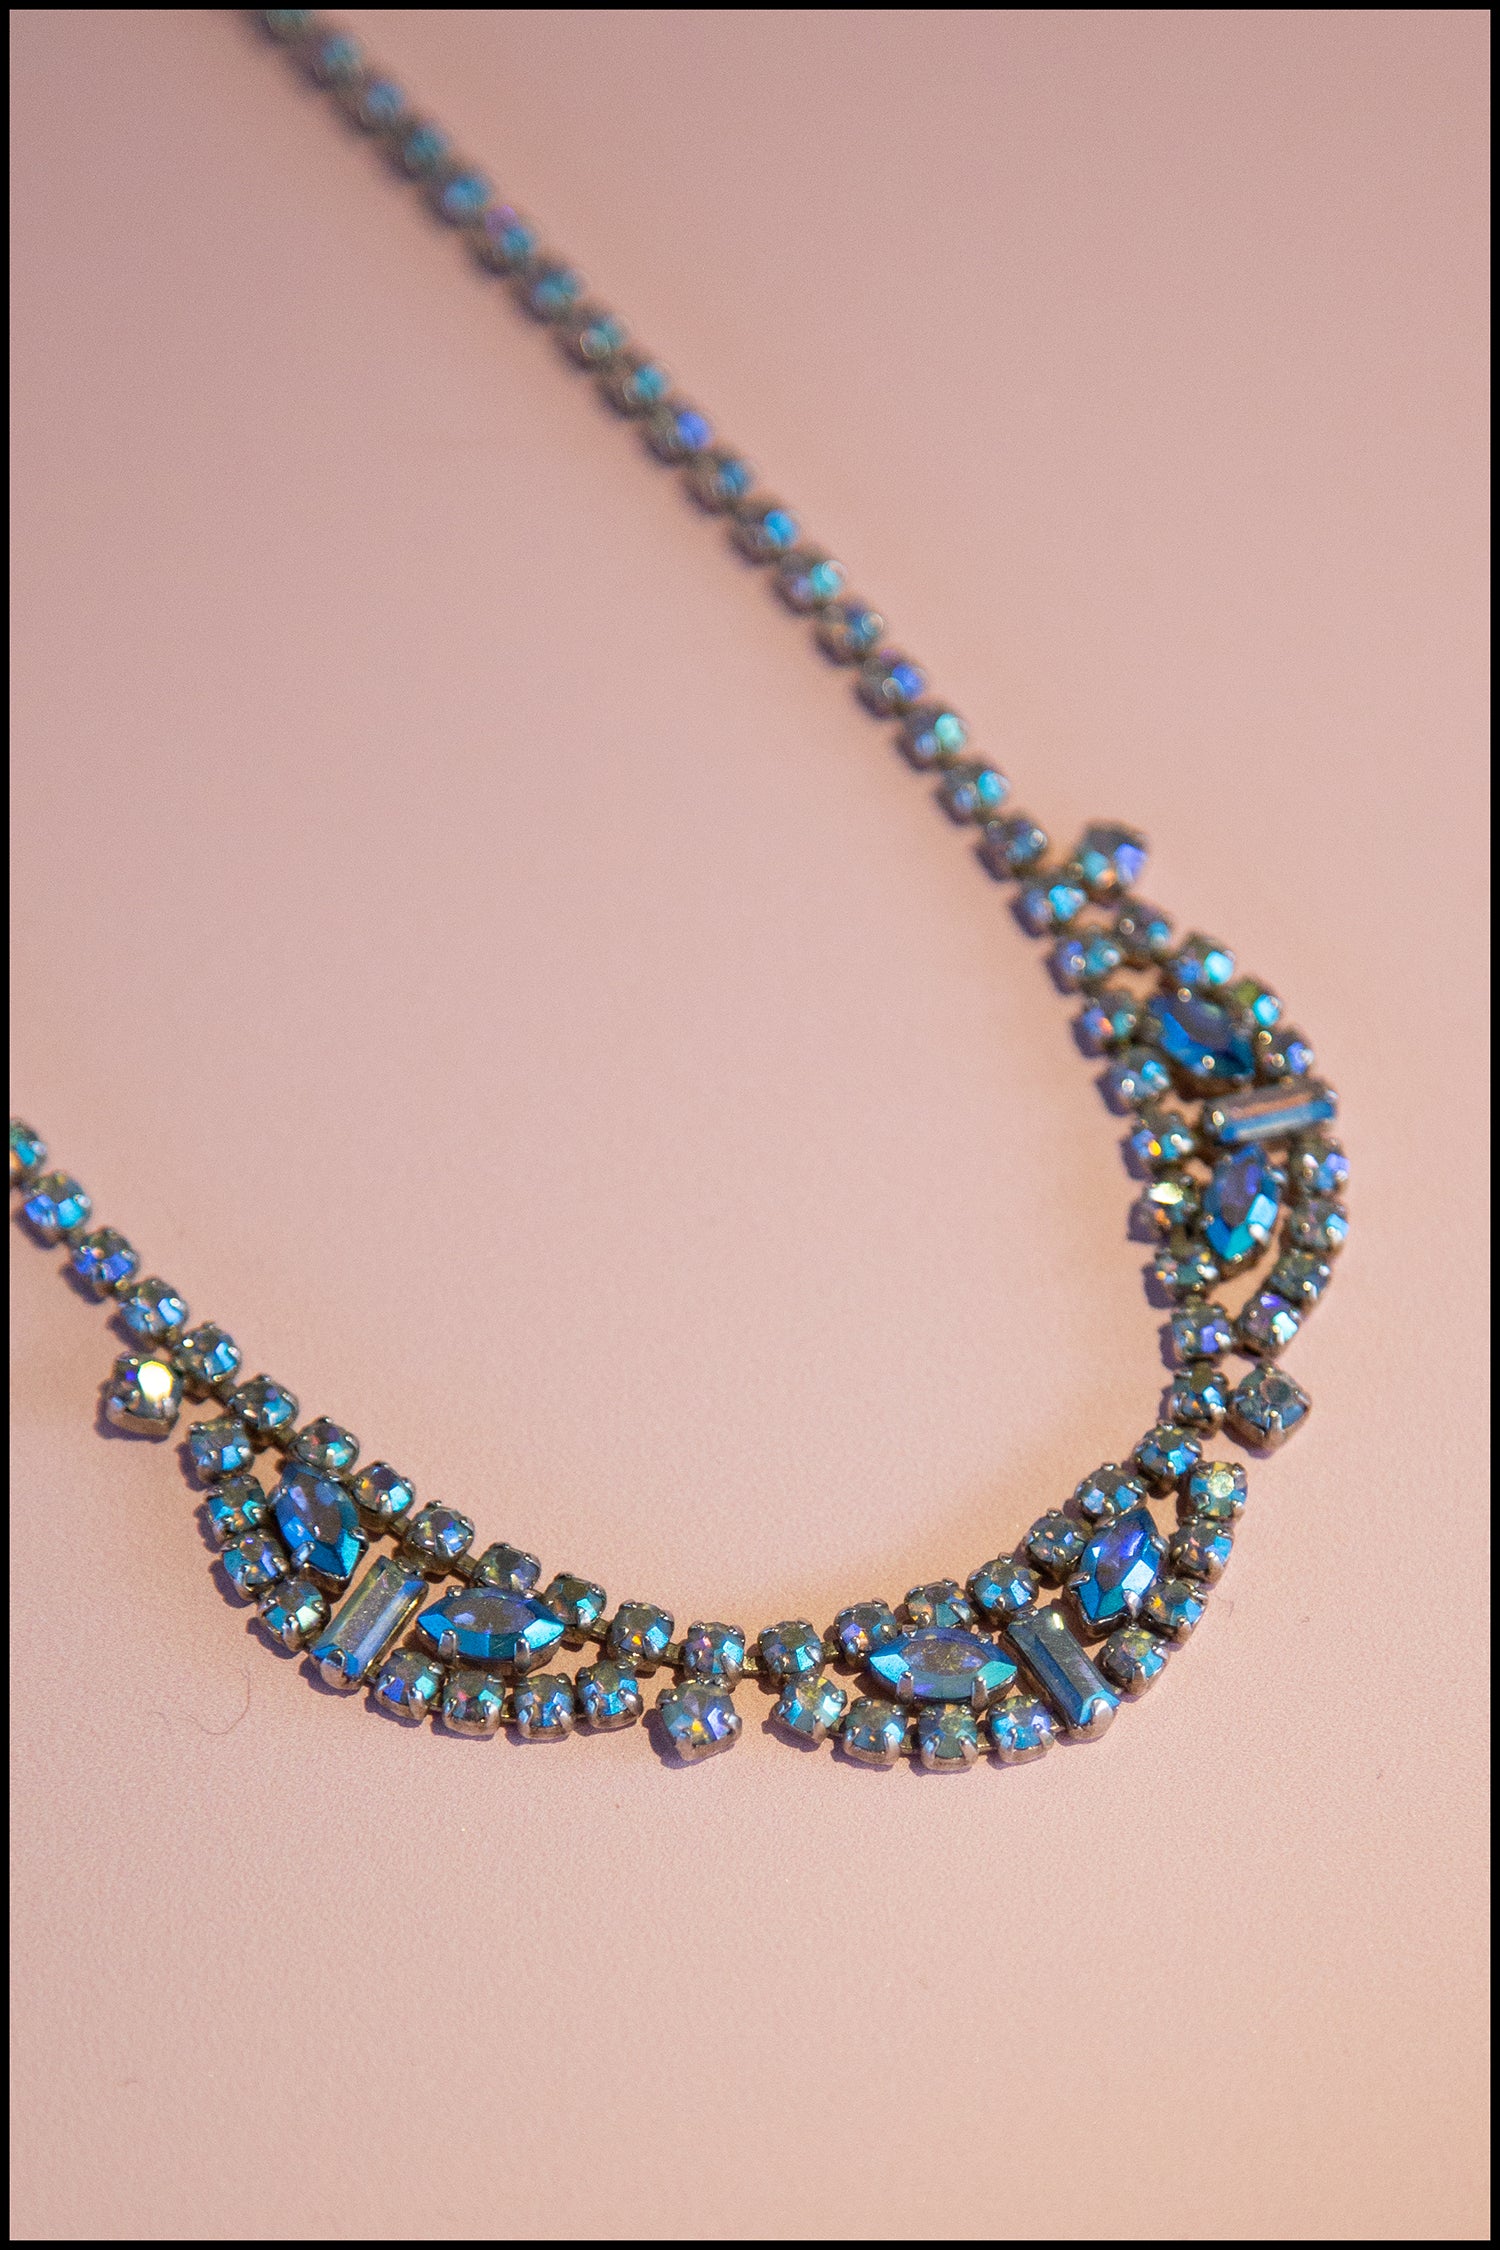 Shades of Blue Rhinestone Necklace - Garden Party Collection Vintage Jewelry